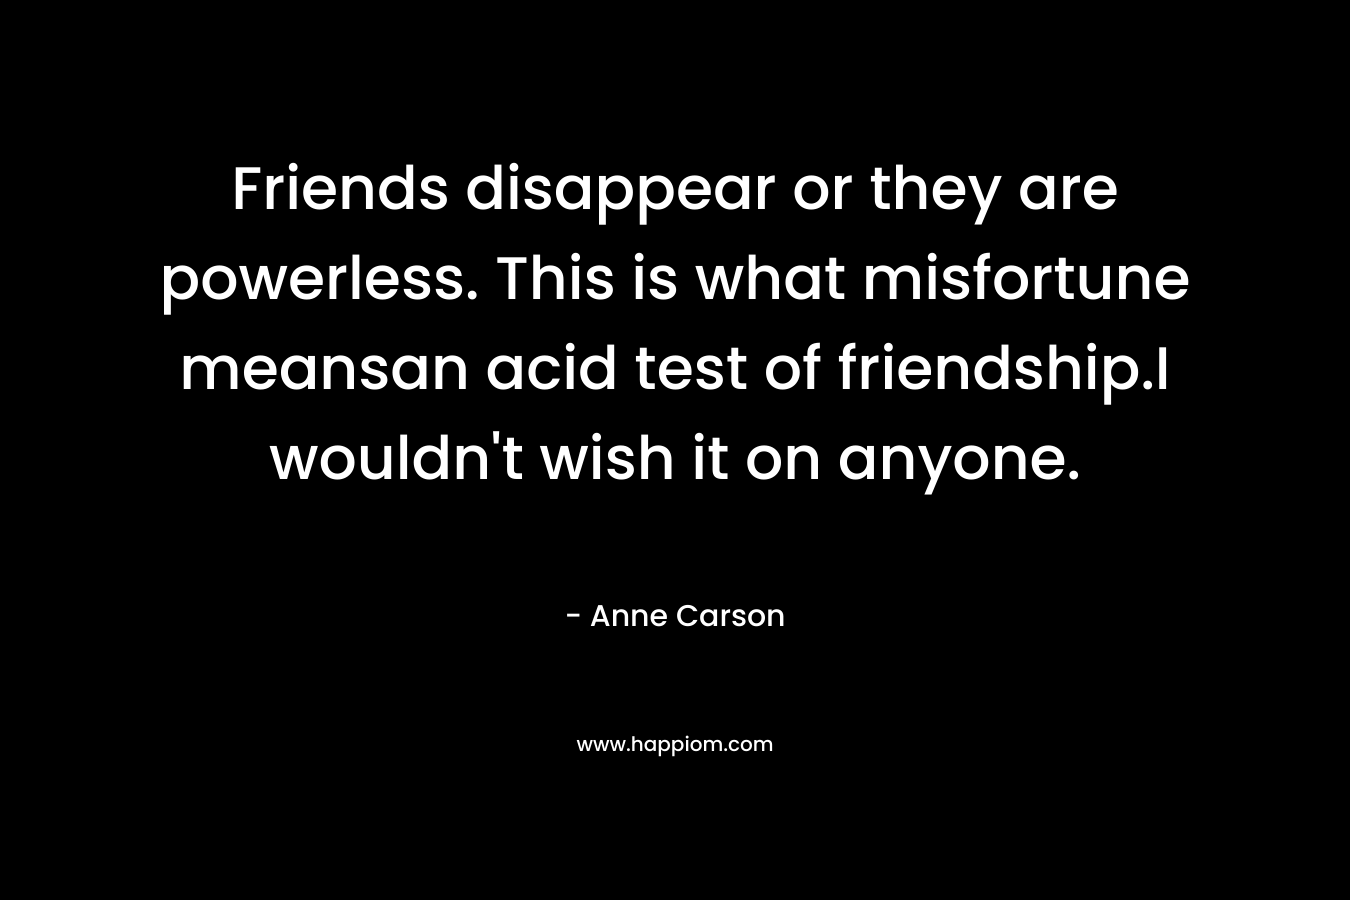 Friends disappear or they are powerless. This is what misfortune meansan acid test of friendship.I wouldn’t wish it on anyone. – Anne Carson